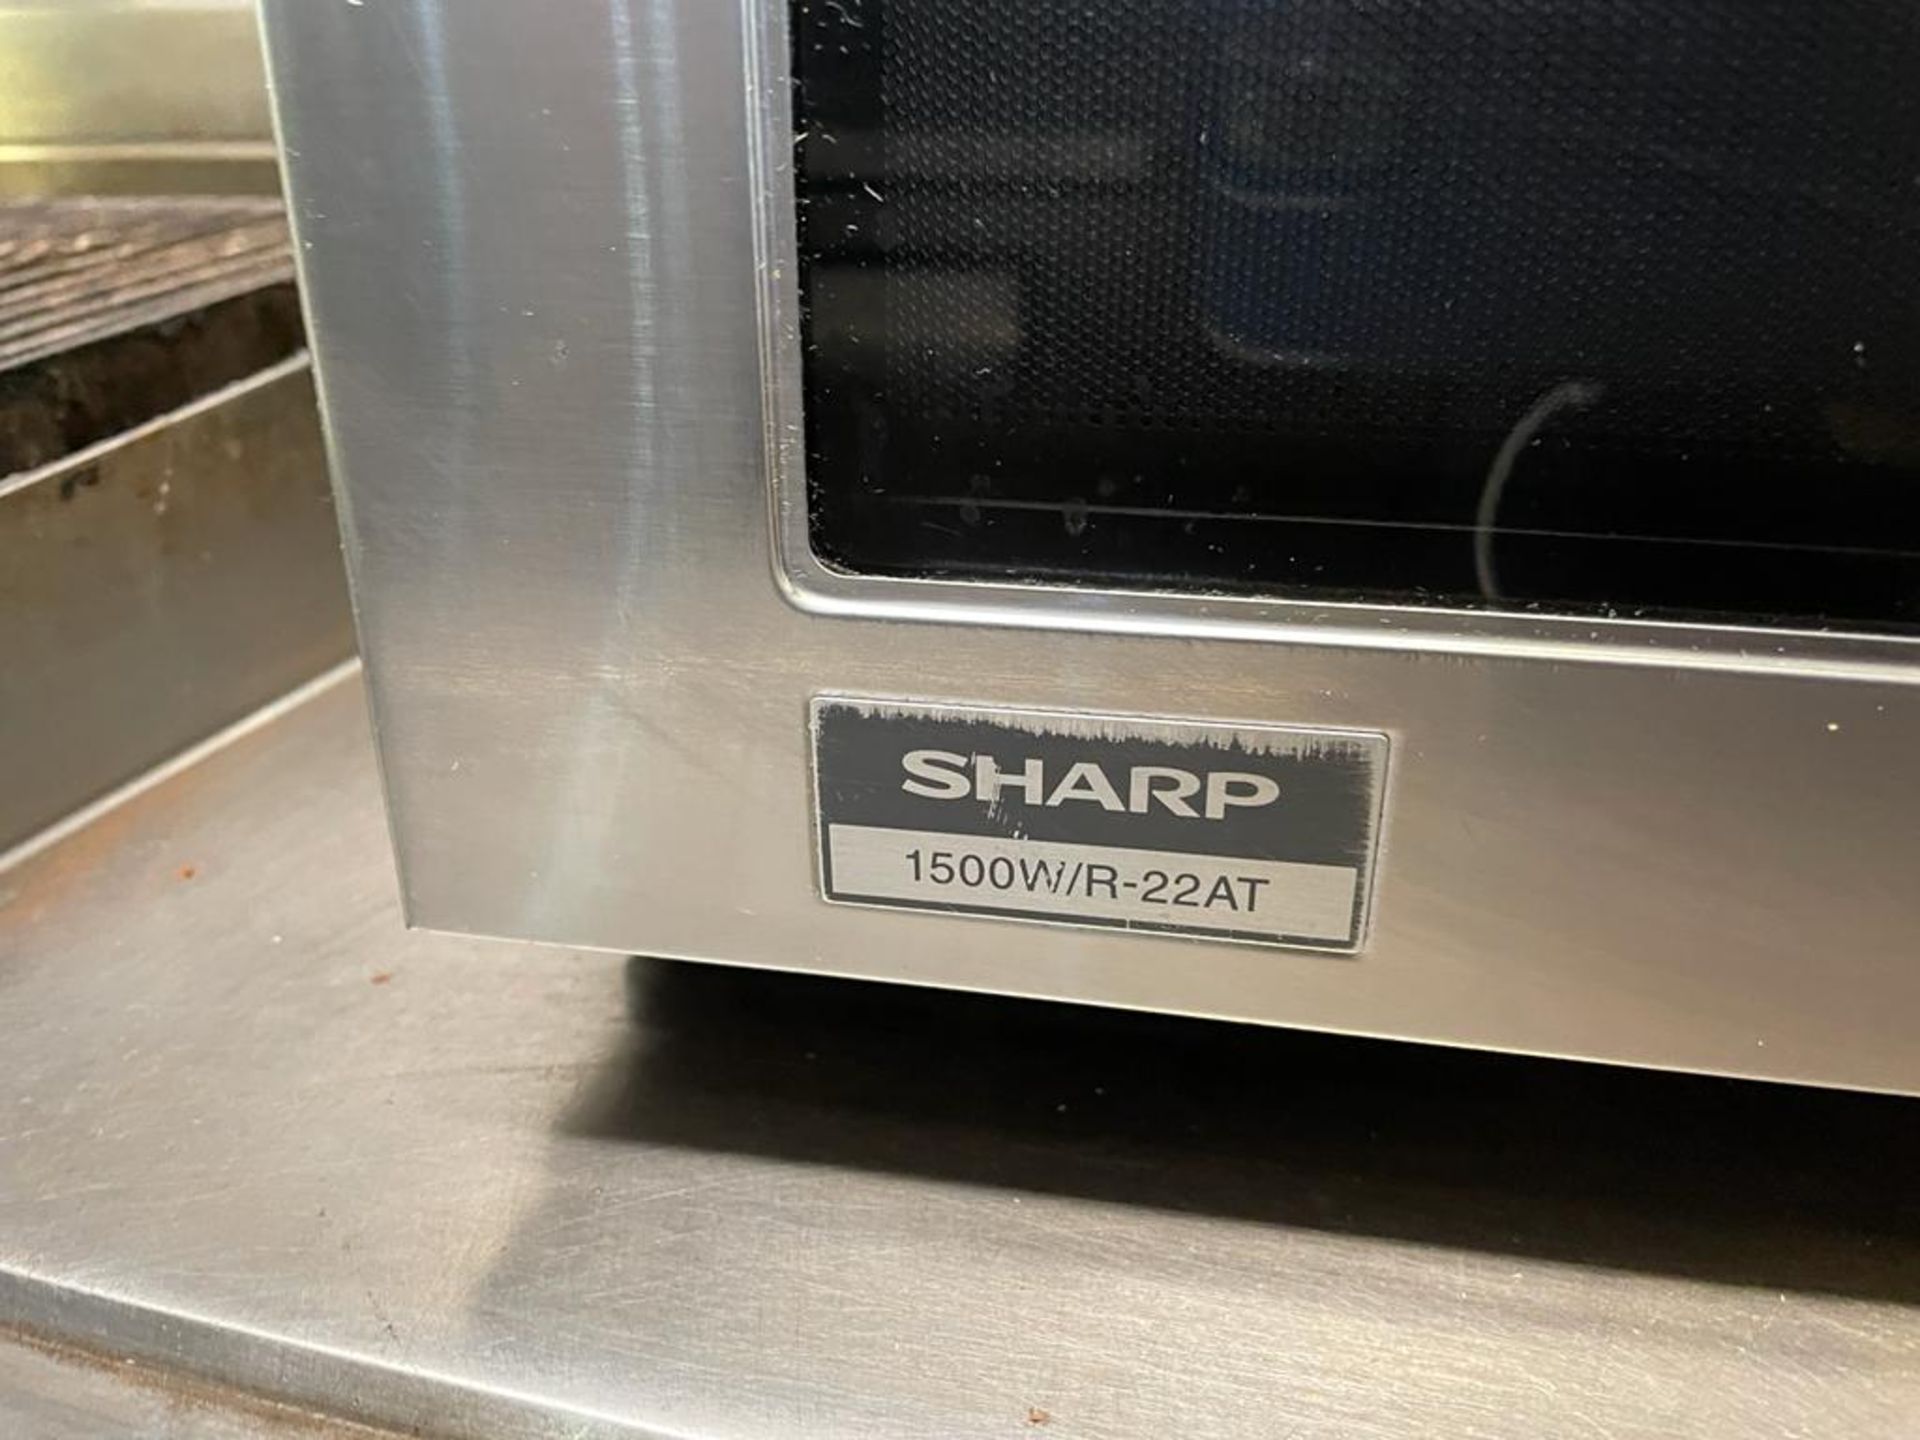 1 x SHARP Heavy Duty Commercial Microwave - Model: 1500W/R-22AT - 28-litre - Dimensions: H33.5 x W51 - Image 3 of 4